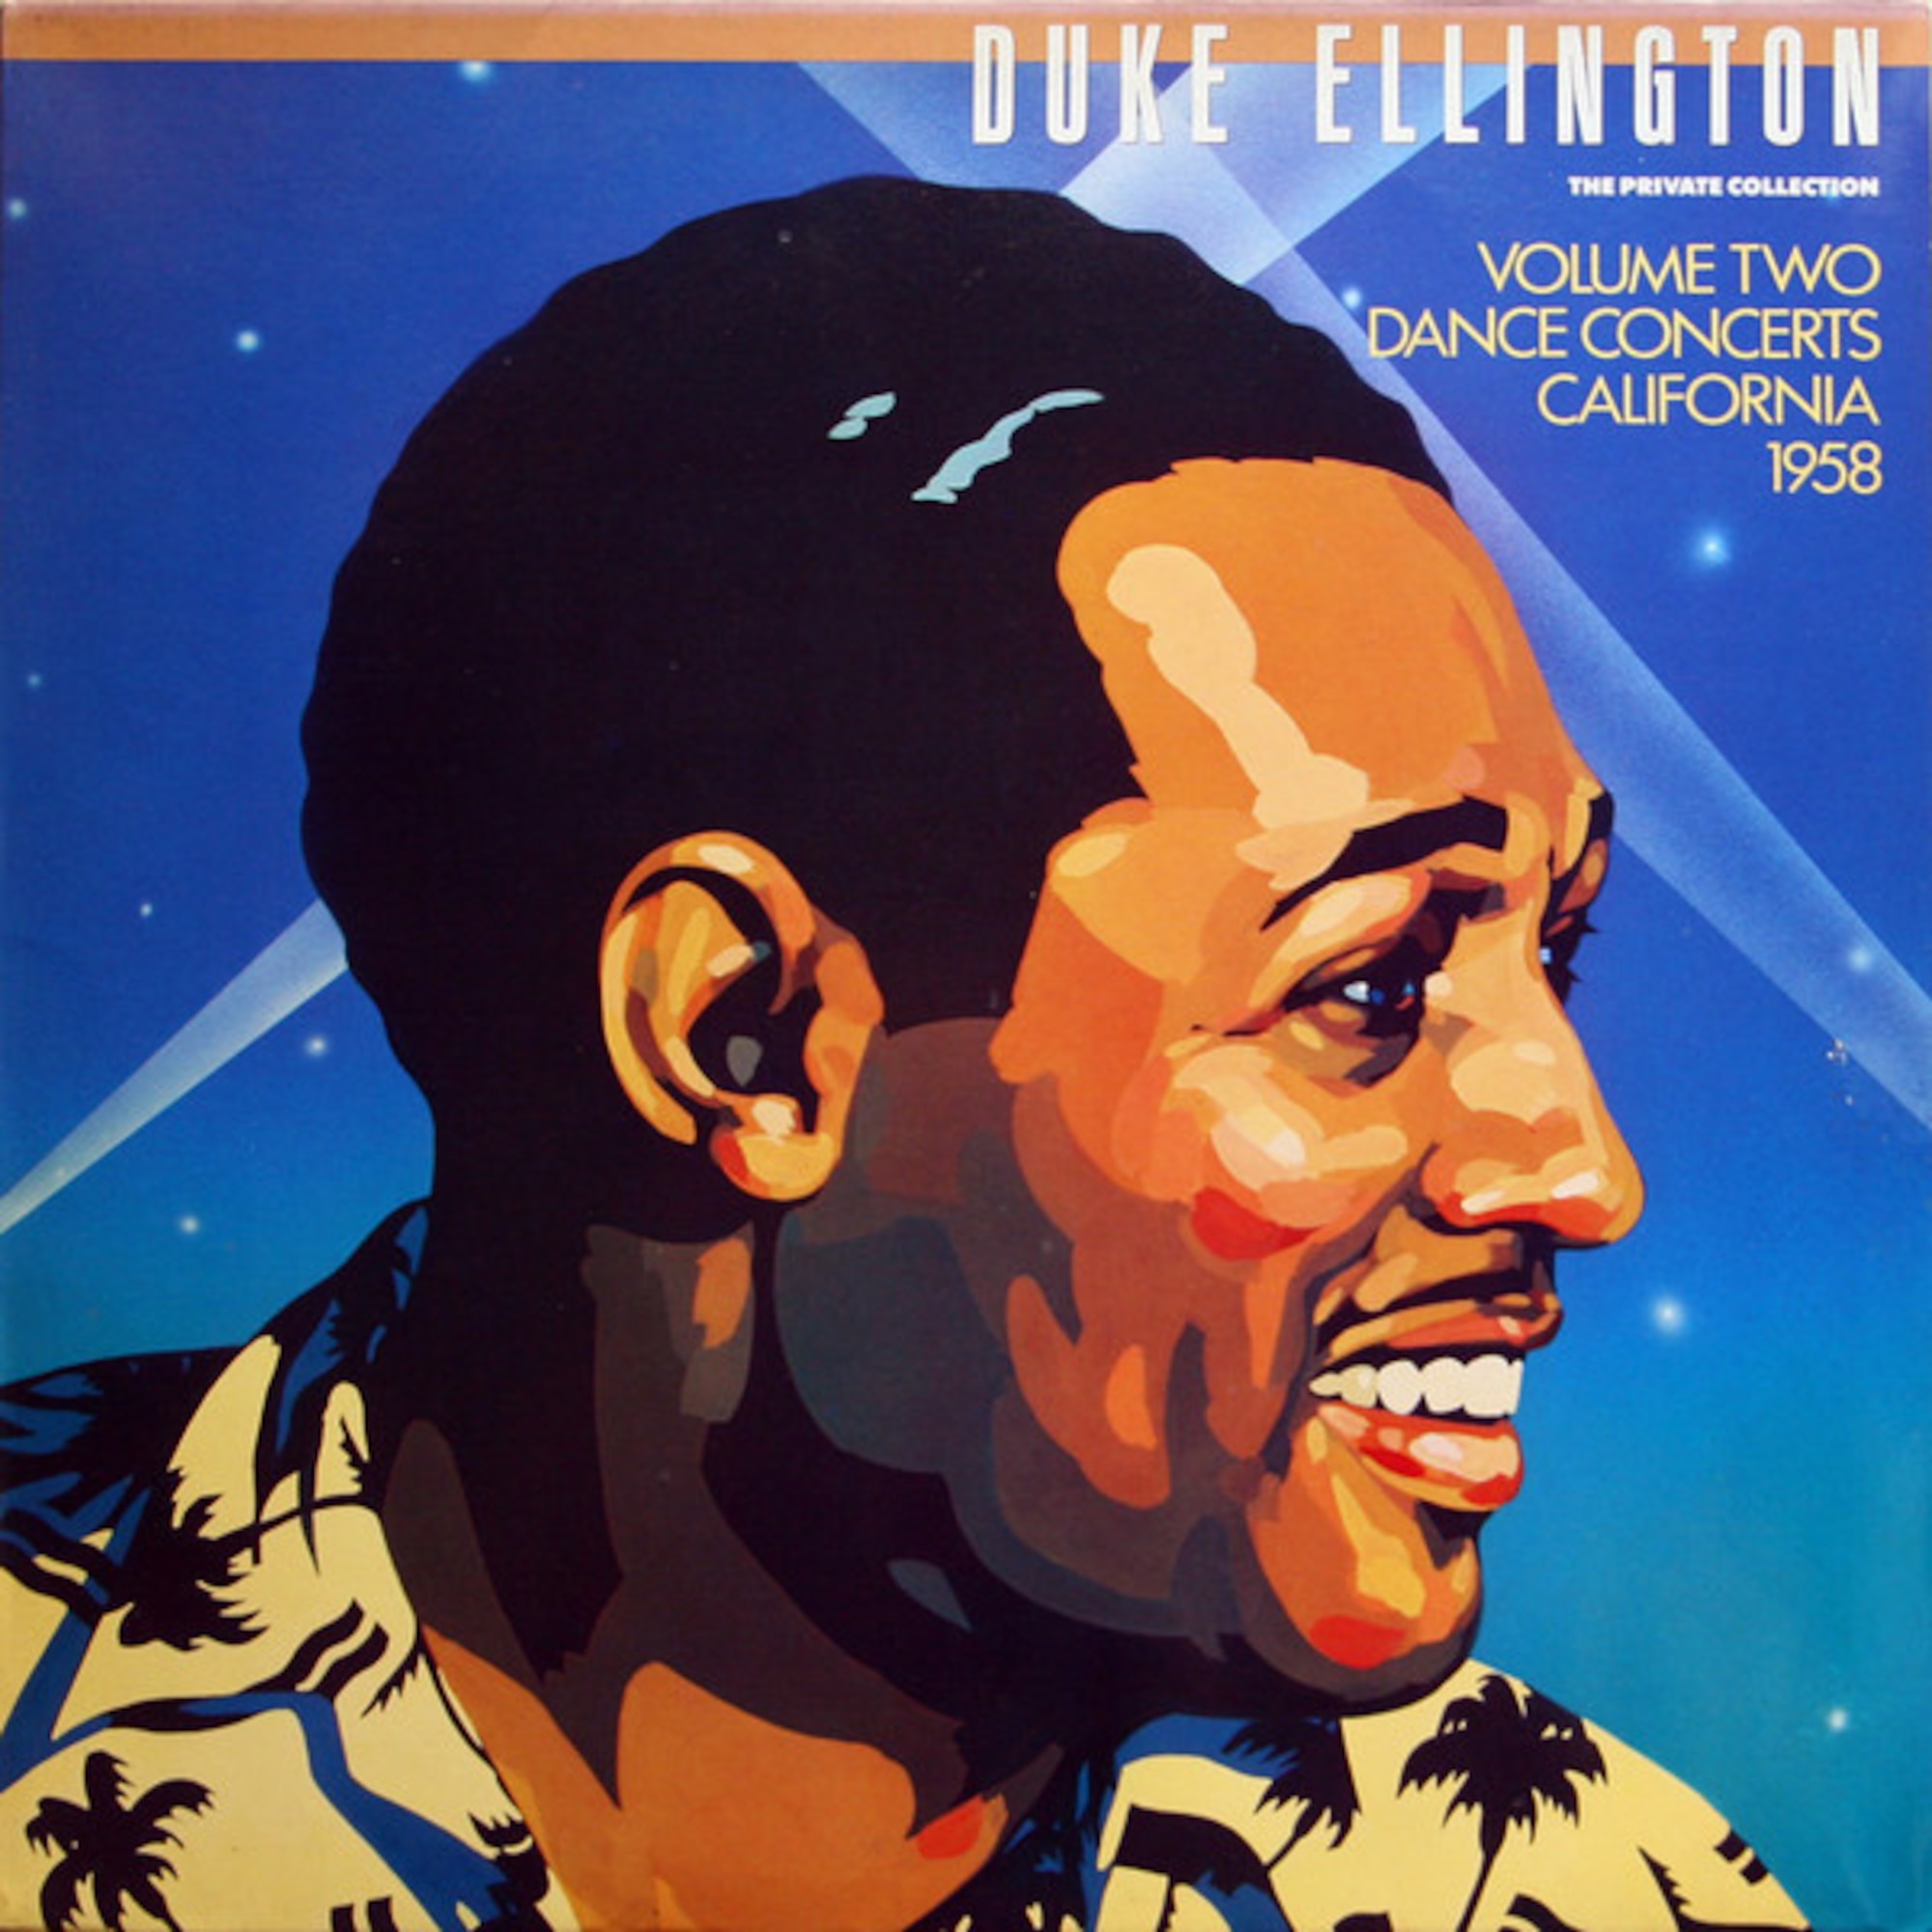 One of the covers for jazz pianist Duke Ellington's "The Private Collection, Vol. 2: Dance Concerts, California, 1958" album. The record, first released in 1987, was recorded March 4, 1958, at Travis Air Force Base, California. (Courtesy image)